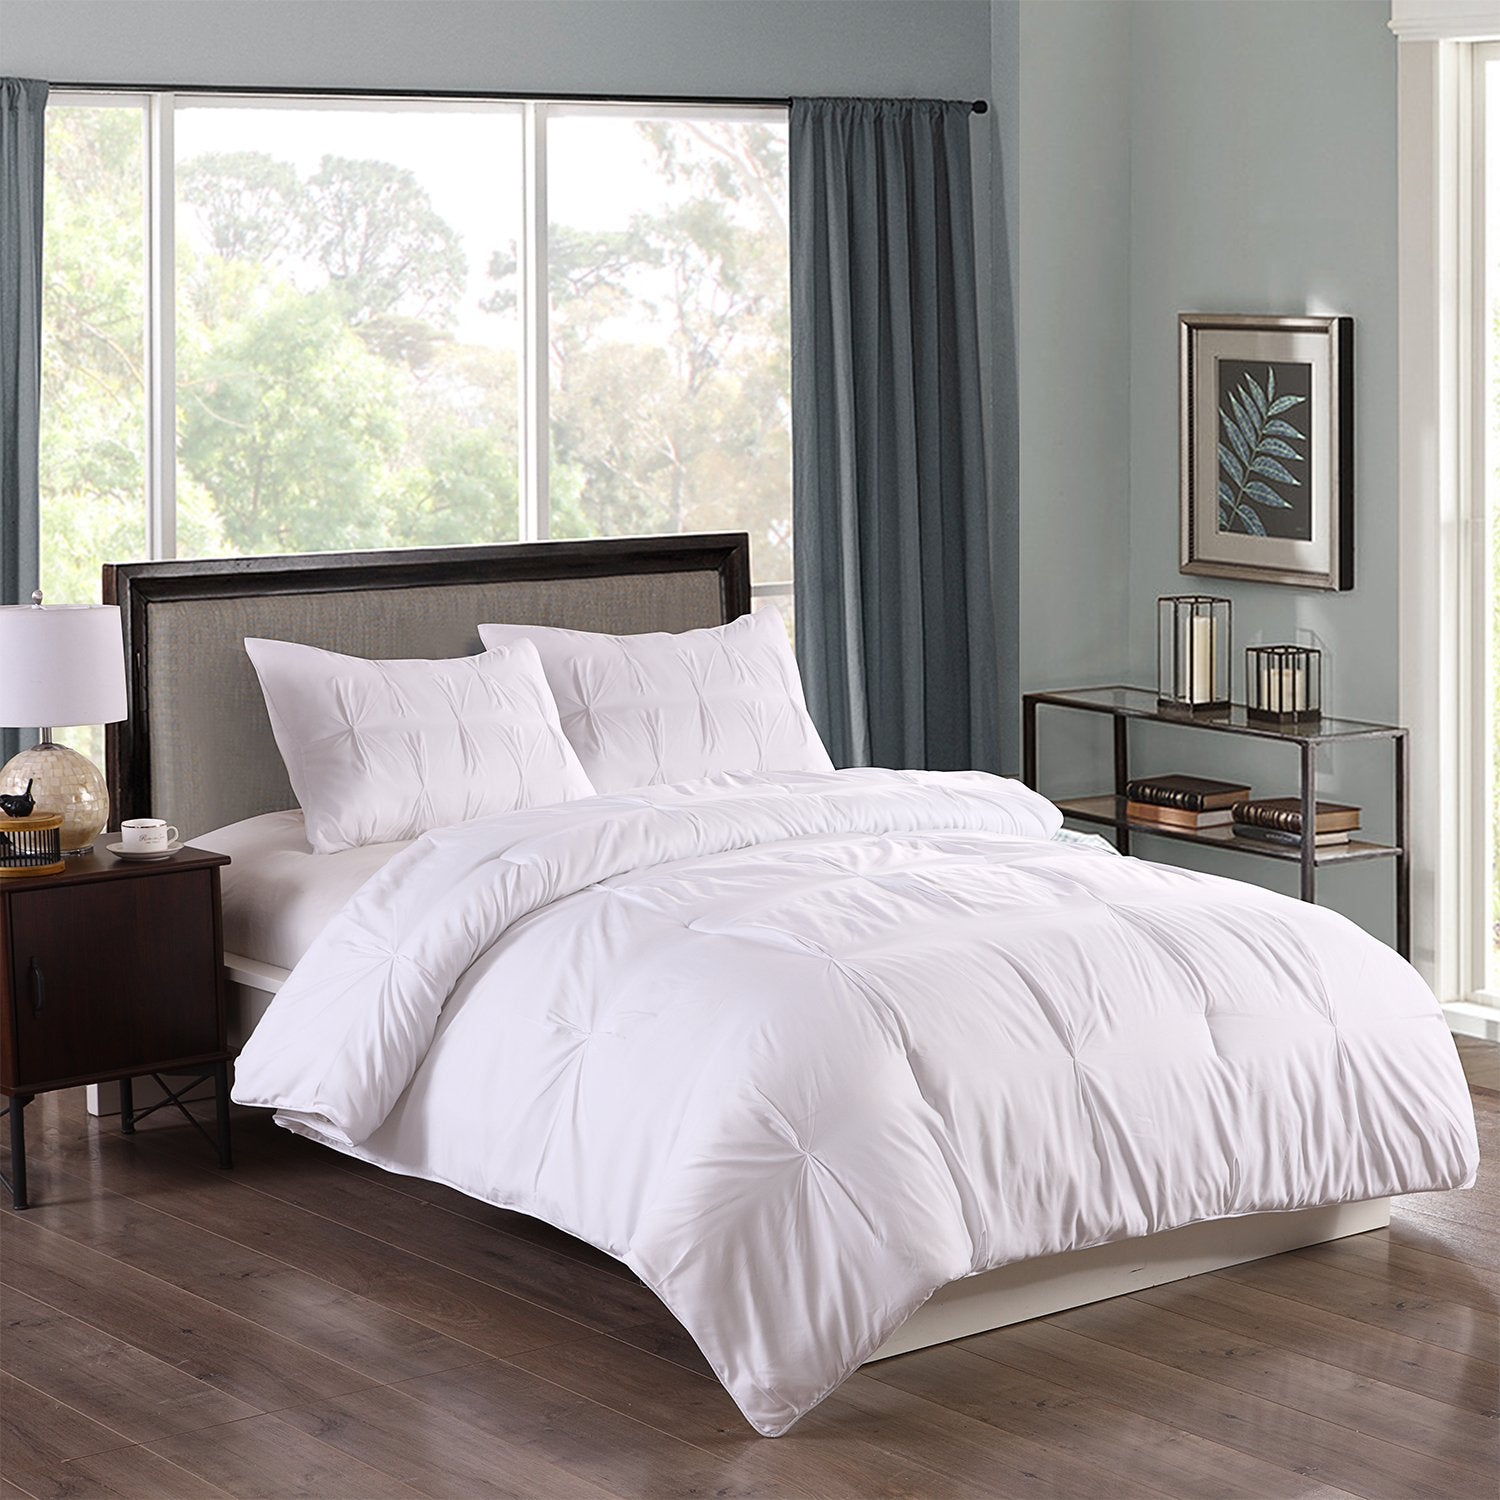 Lotus Home Water and Stain Resistant Pintuck Comforter Set